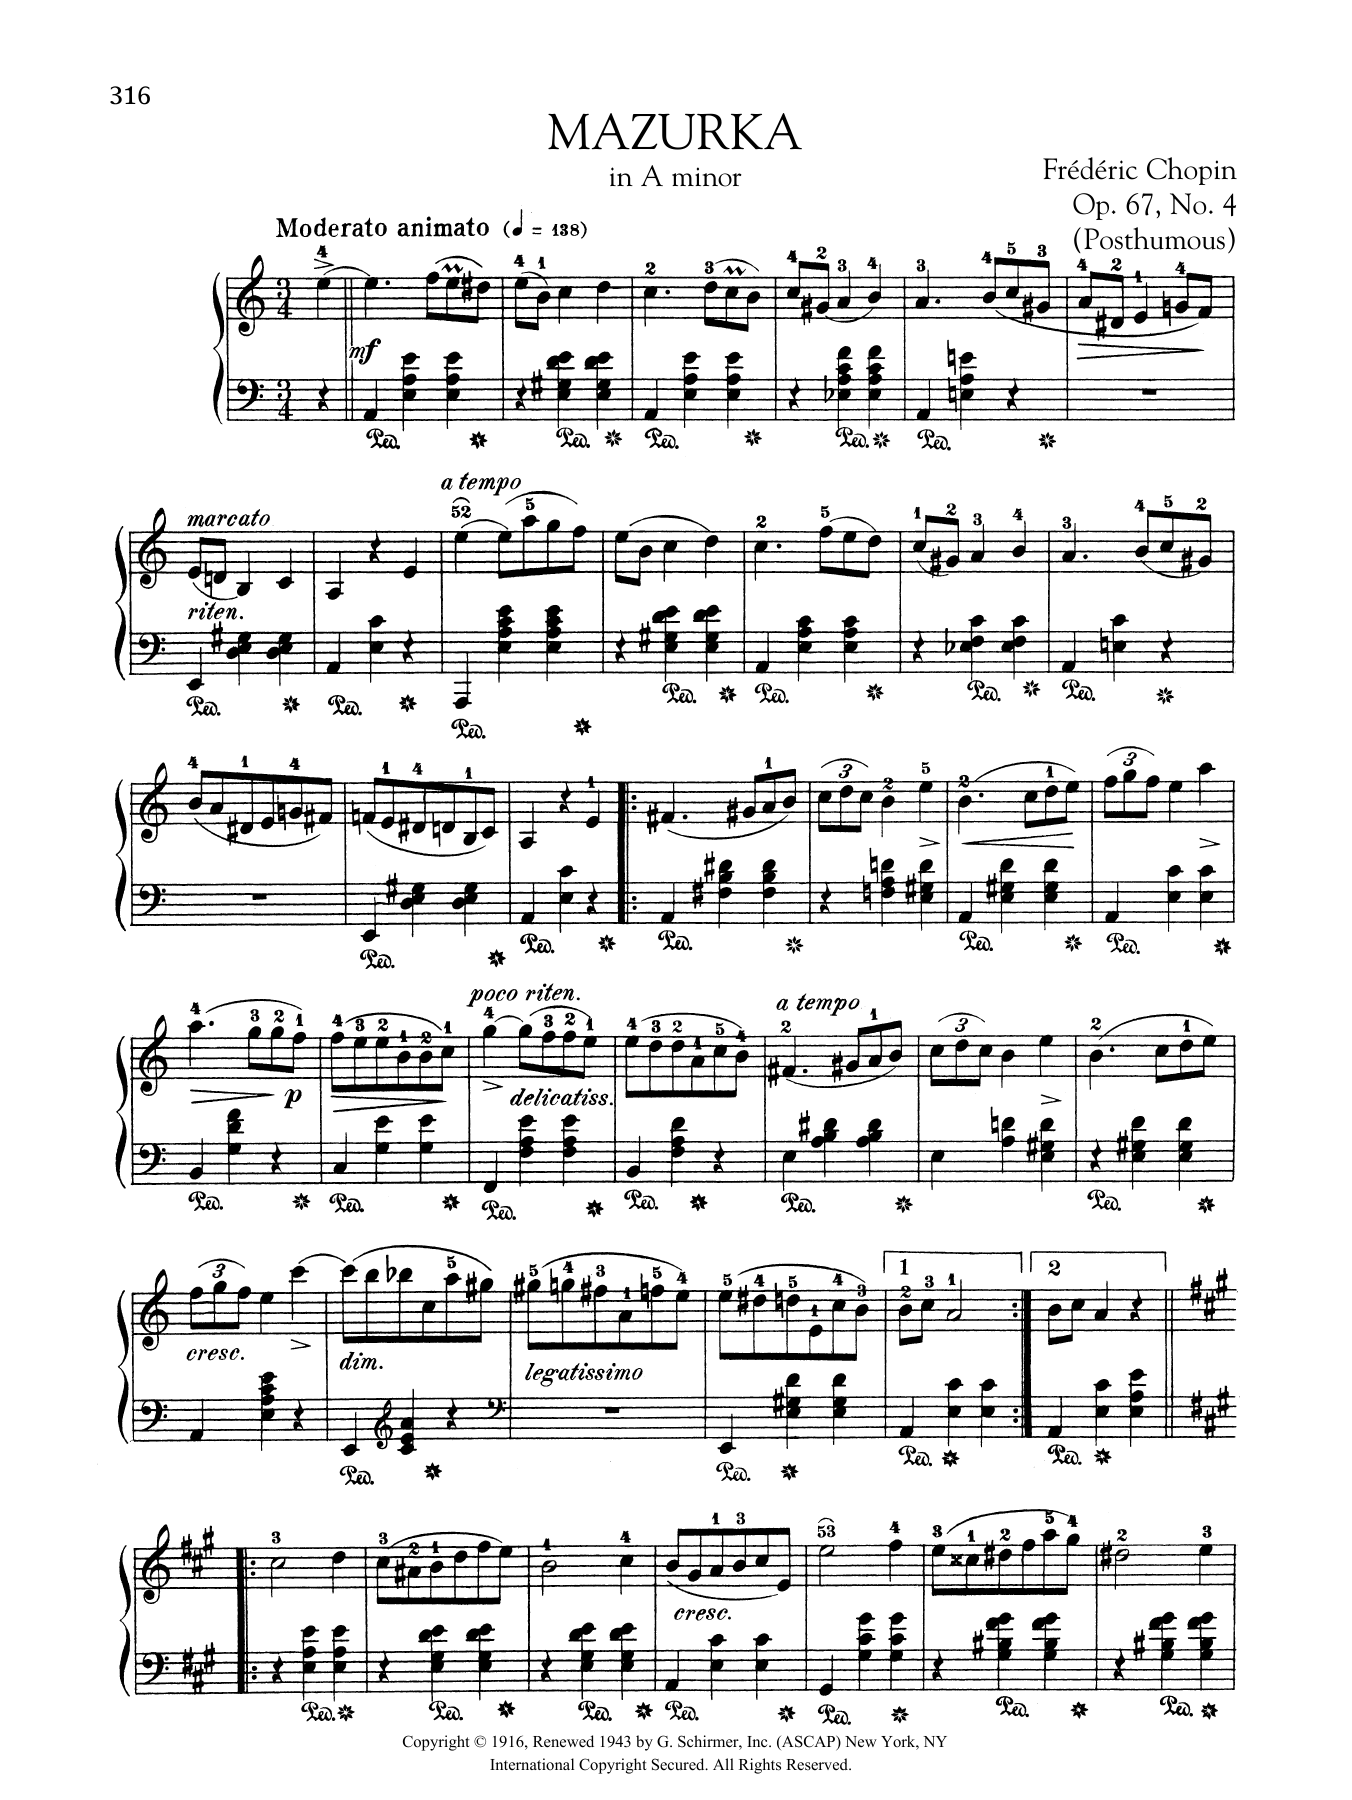 Frédéric Chopin Mazurka in A minor, Op. 67, No. 4 (Posthumous) sheet music notes and chords. Download Printable PDF.